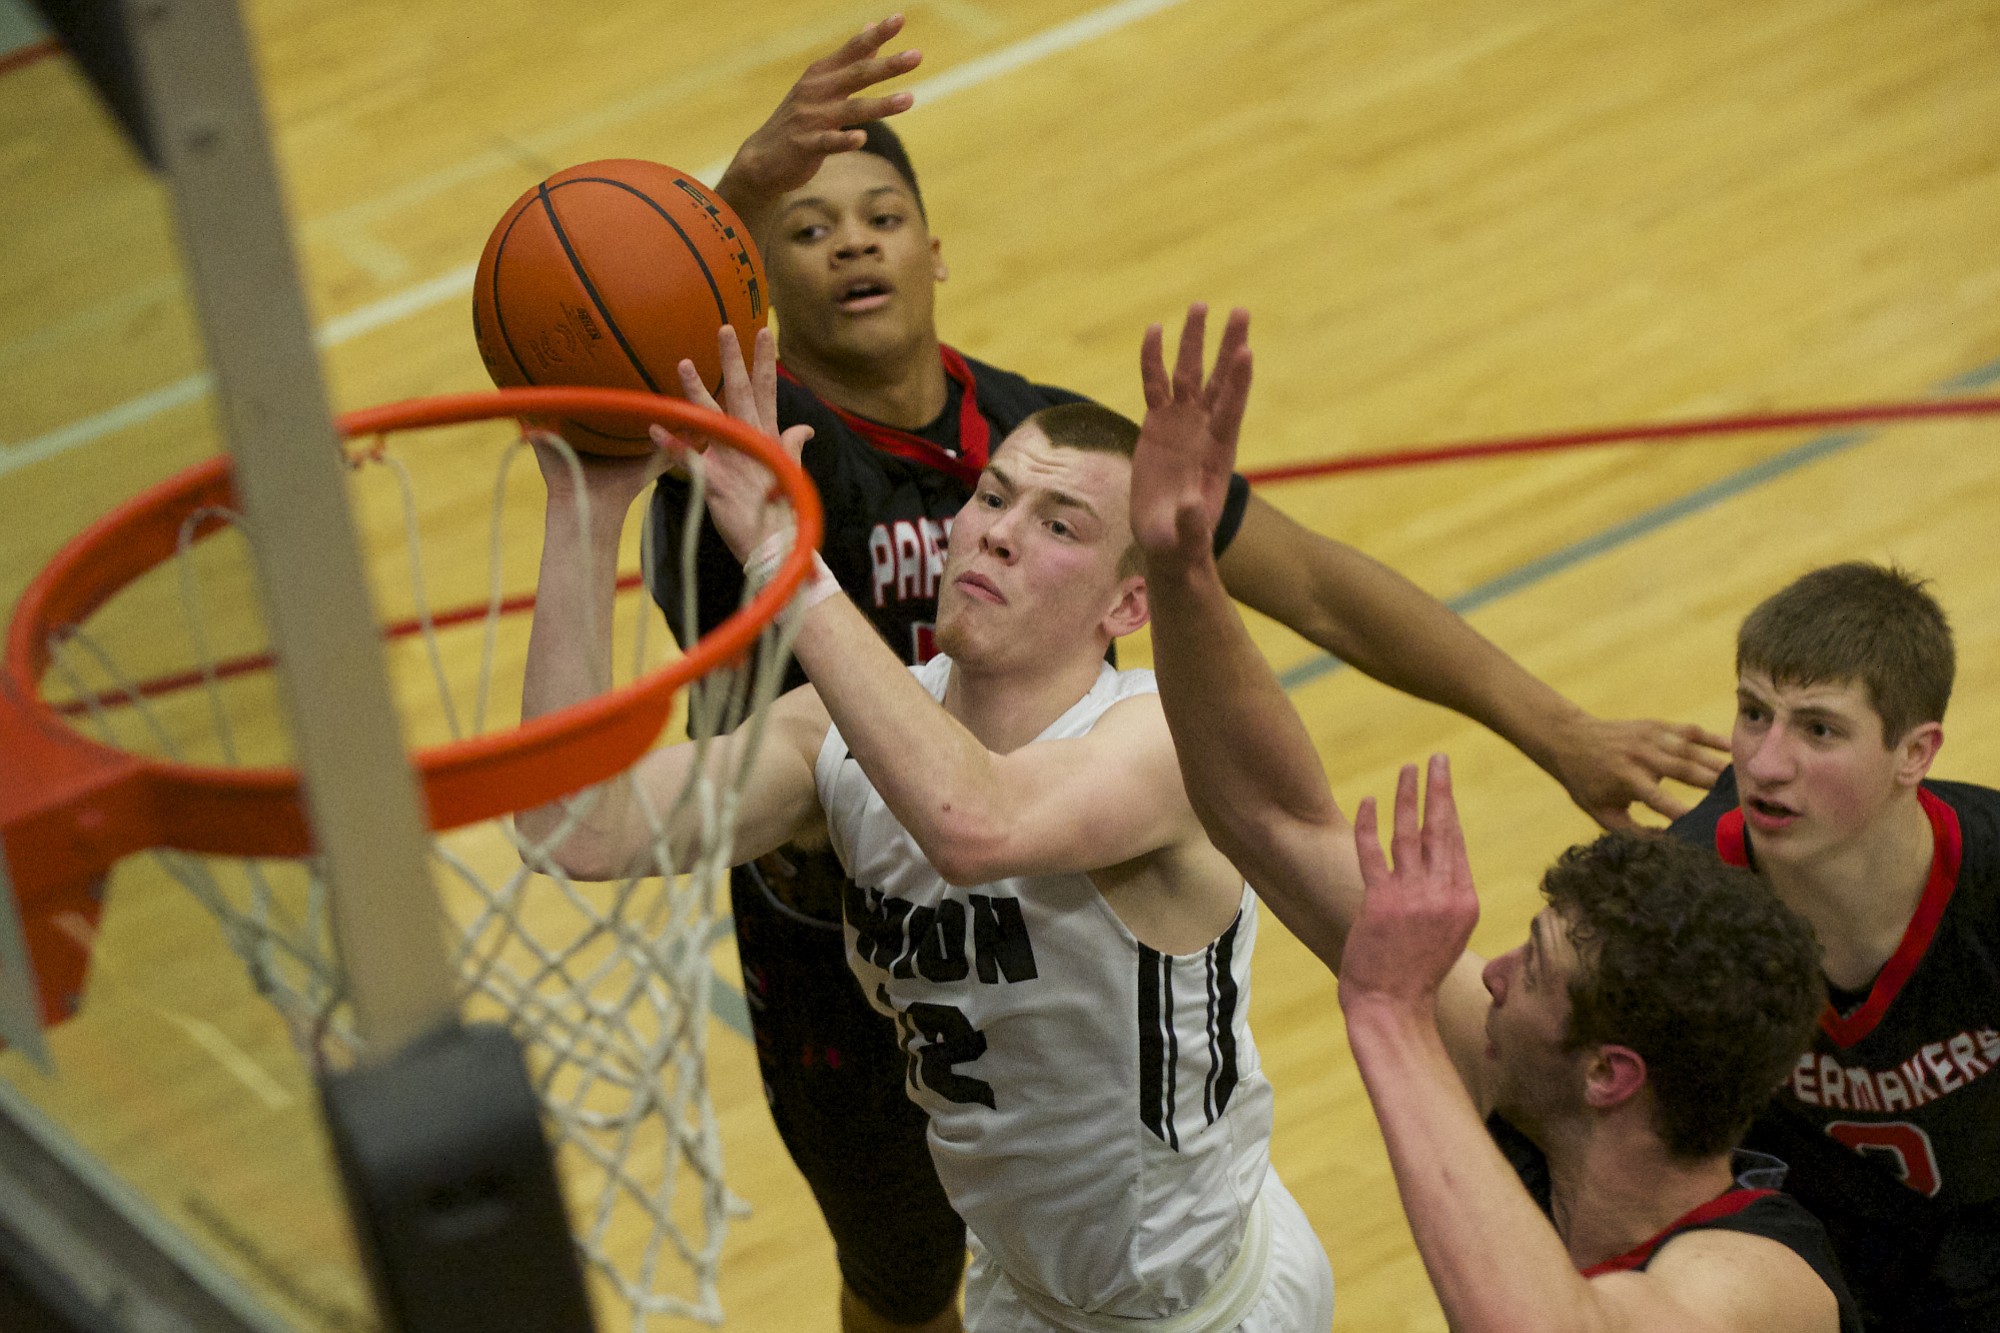 Union's Micah Paulson drives to the basket against Camas.